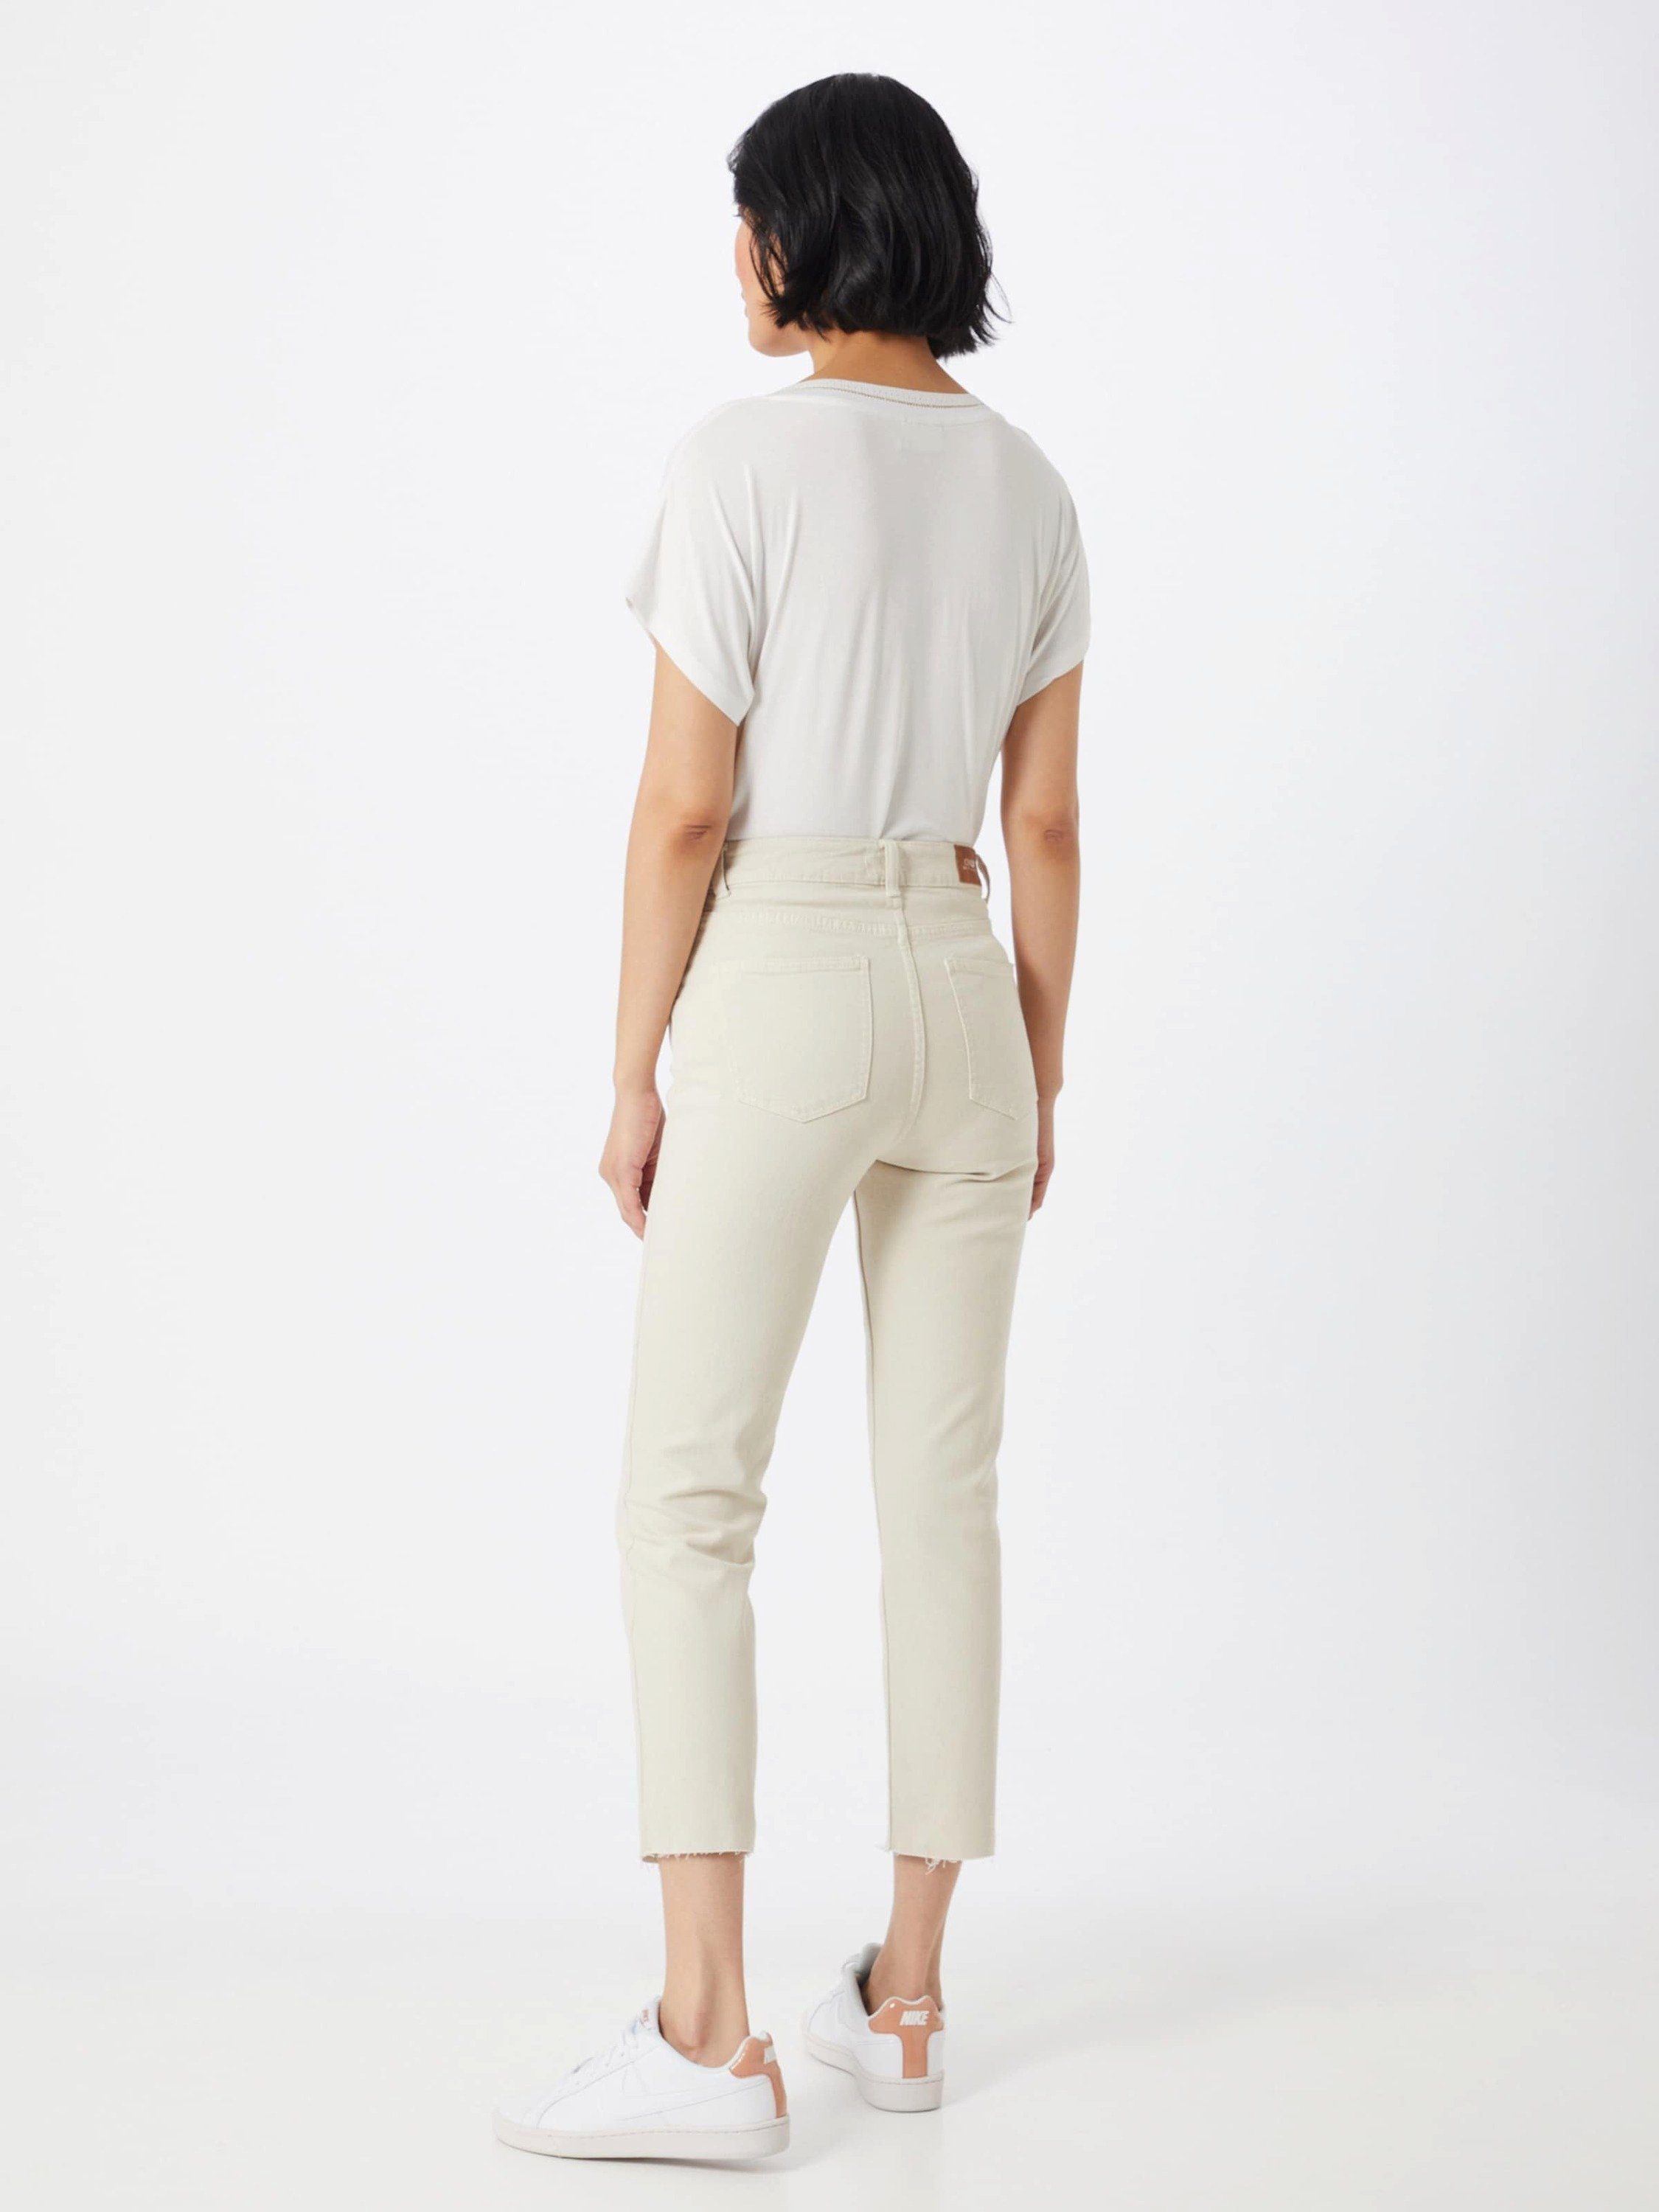 Plain/ohne Weiteres Detail, Cut-Outs, Fransen, 7/8-Jeans ONLY (1-tlg) Details